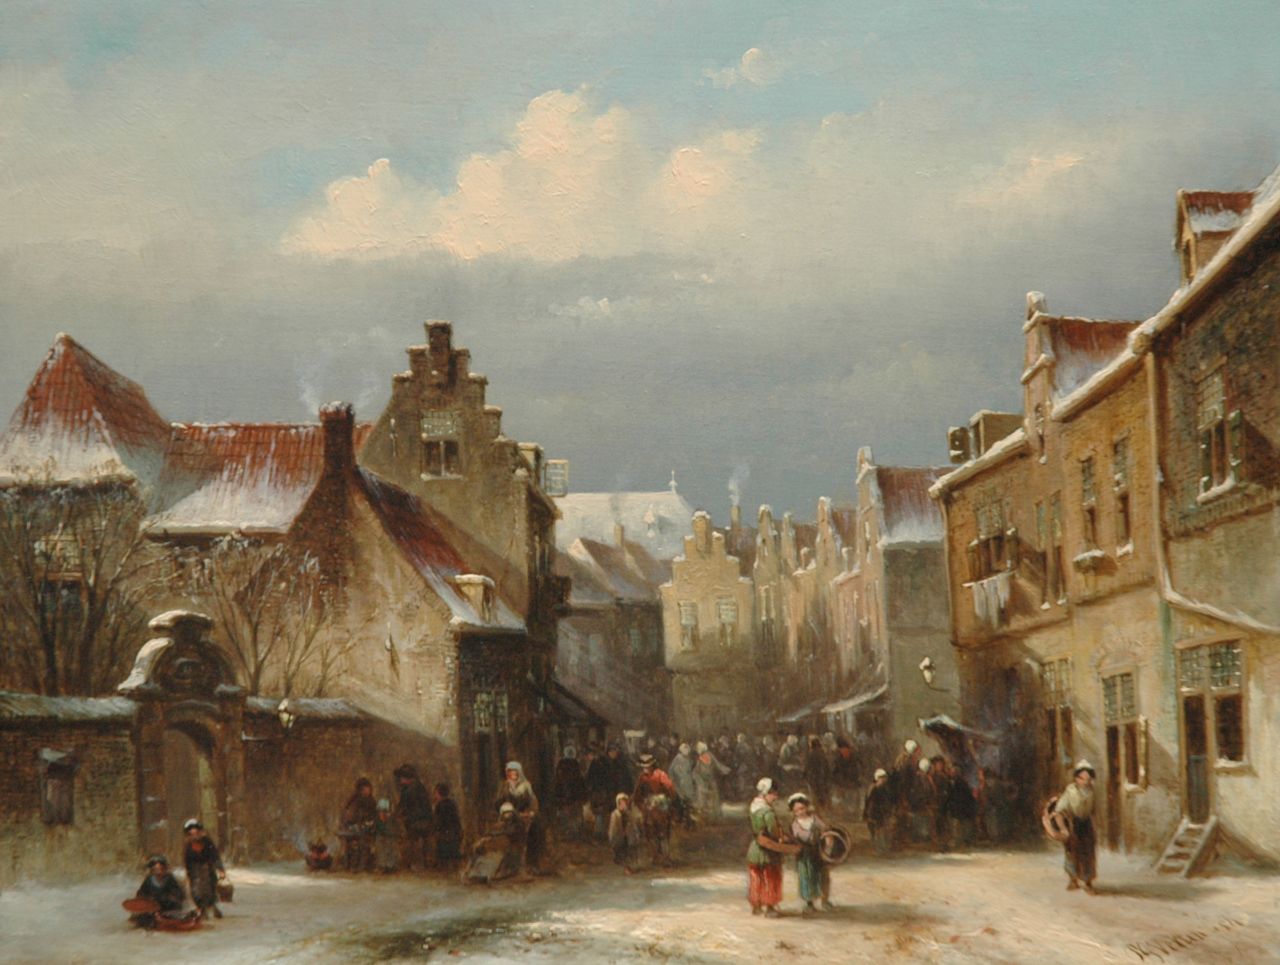 Vertin P.G.  | Petrus Gerardus Vertin, A market in winter, oil on panel 23.1 x 30.2 cm, signed l.r. and dated '54